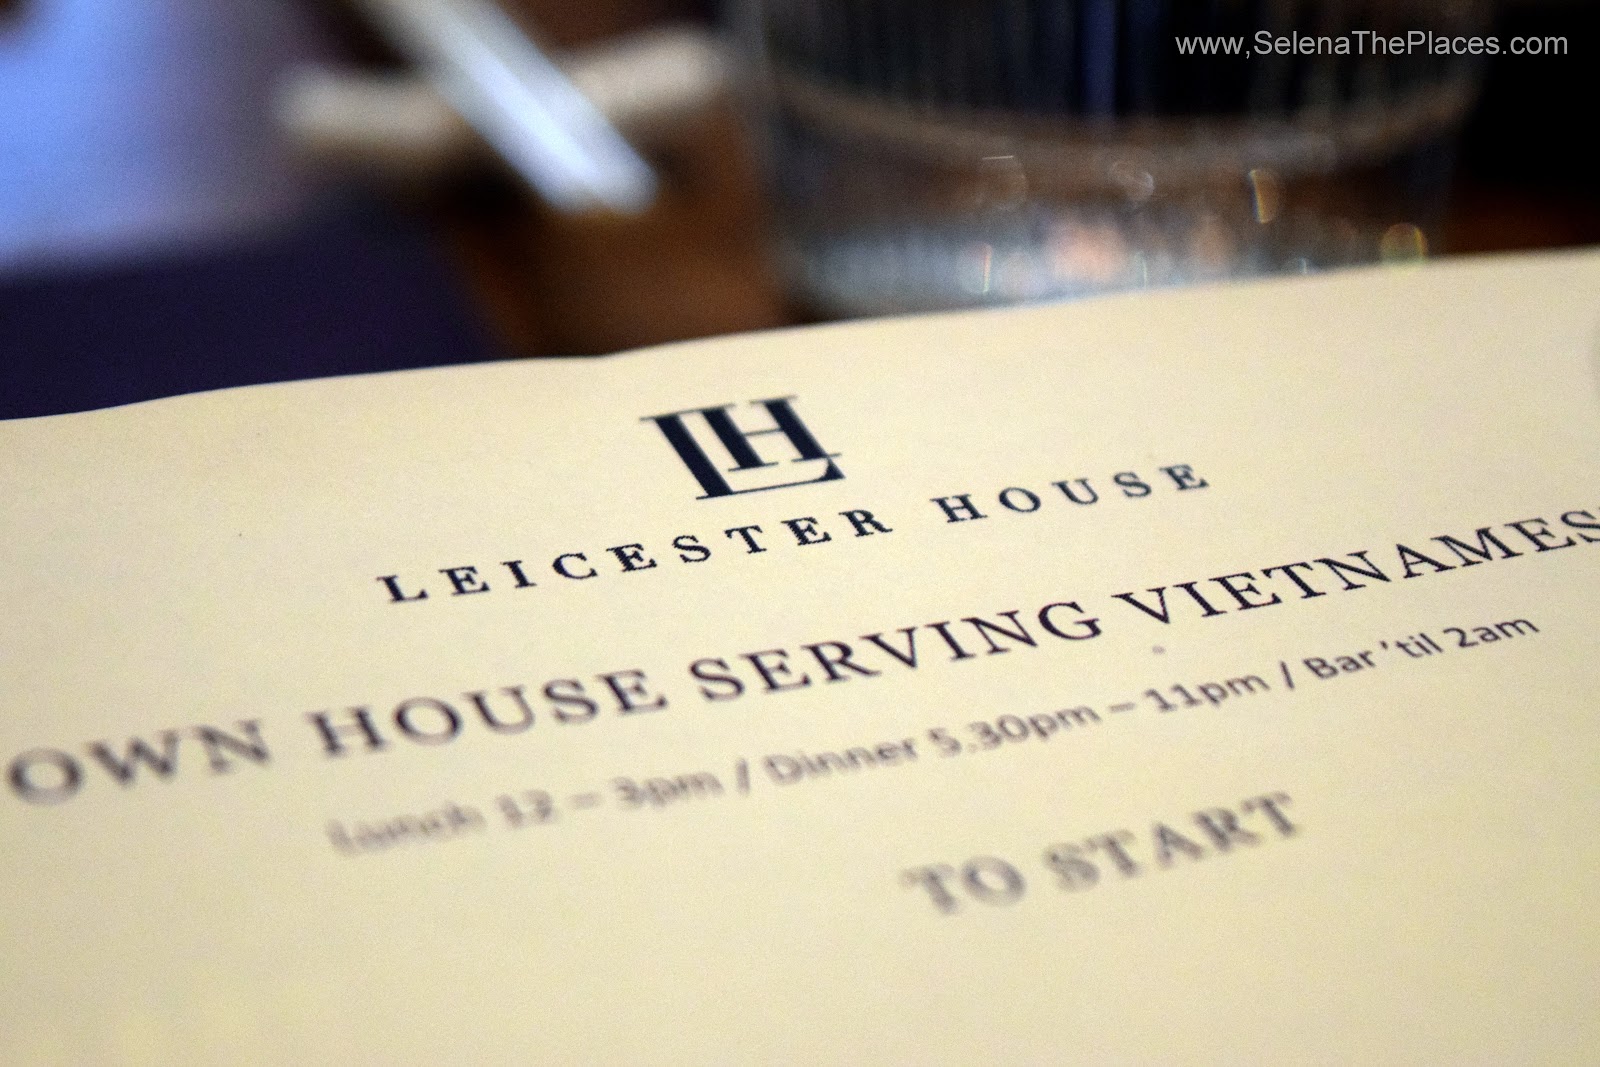 Leicester House in London Restaurant Review